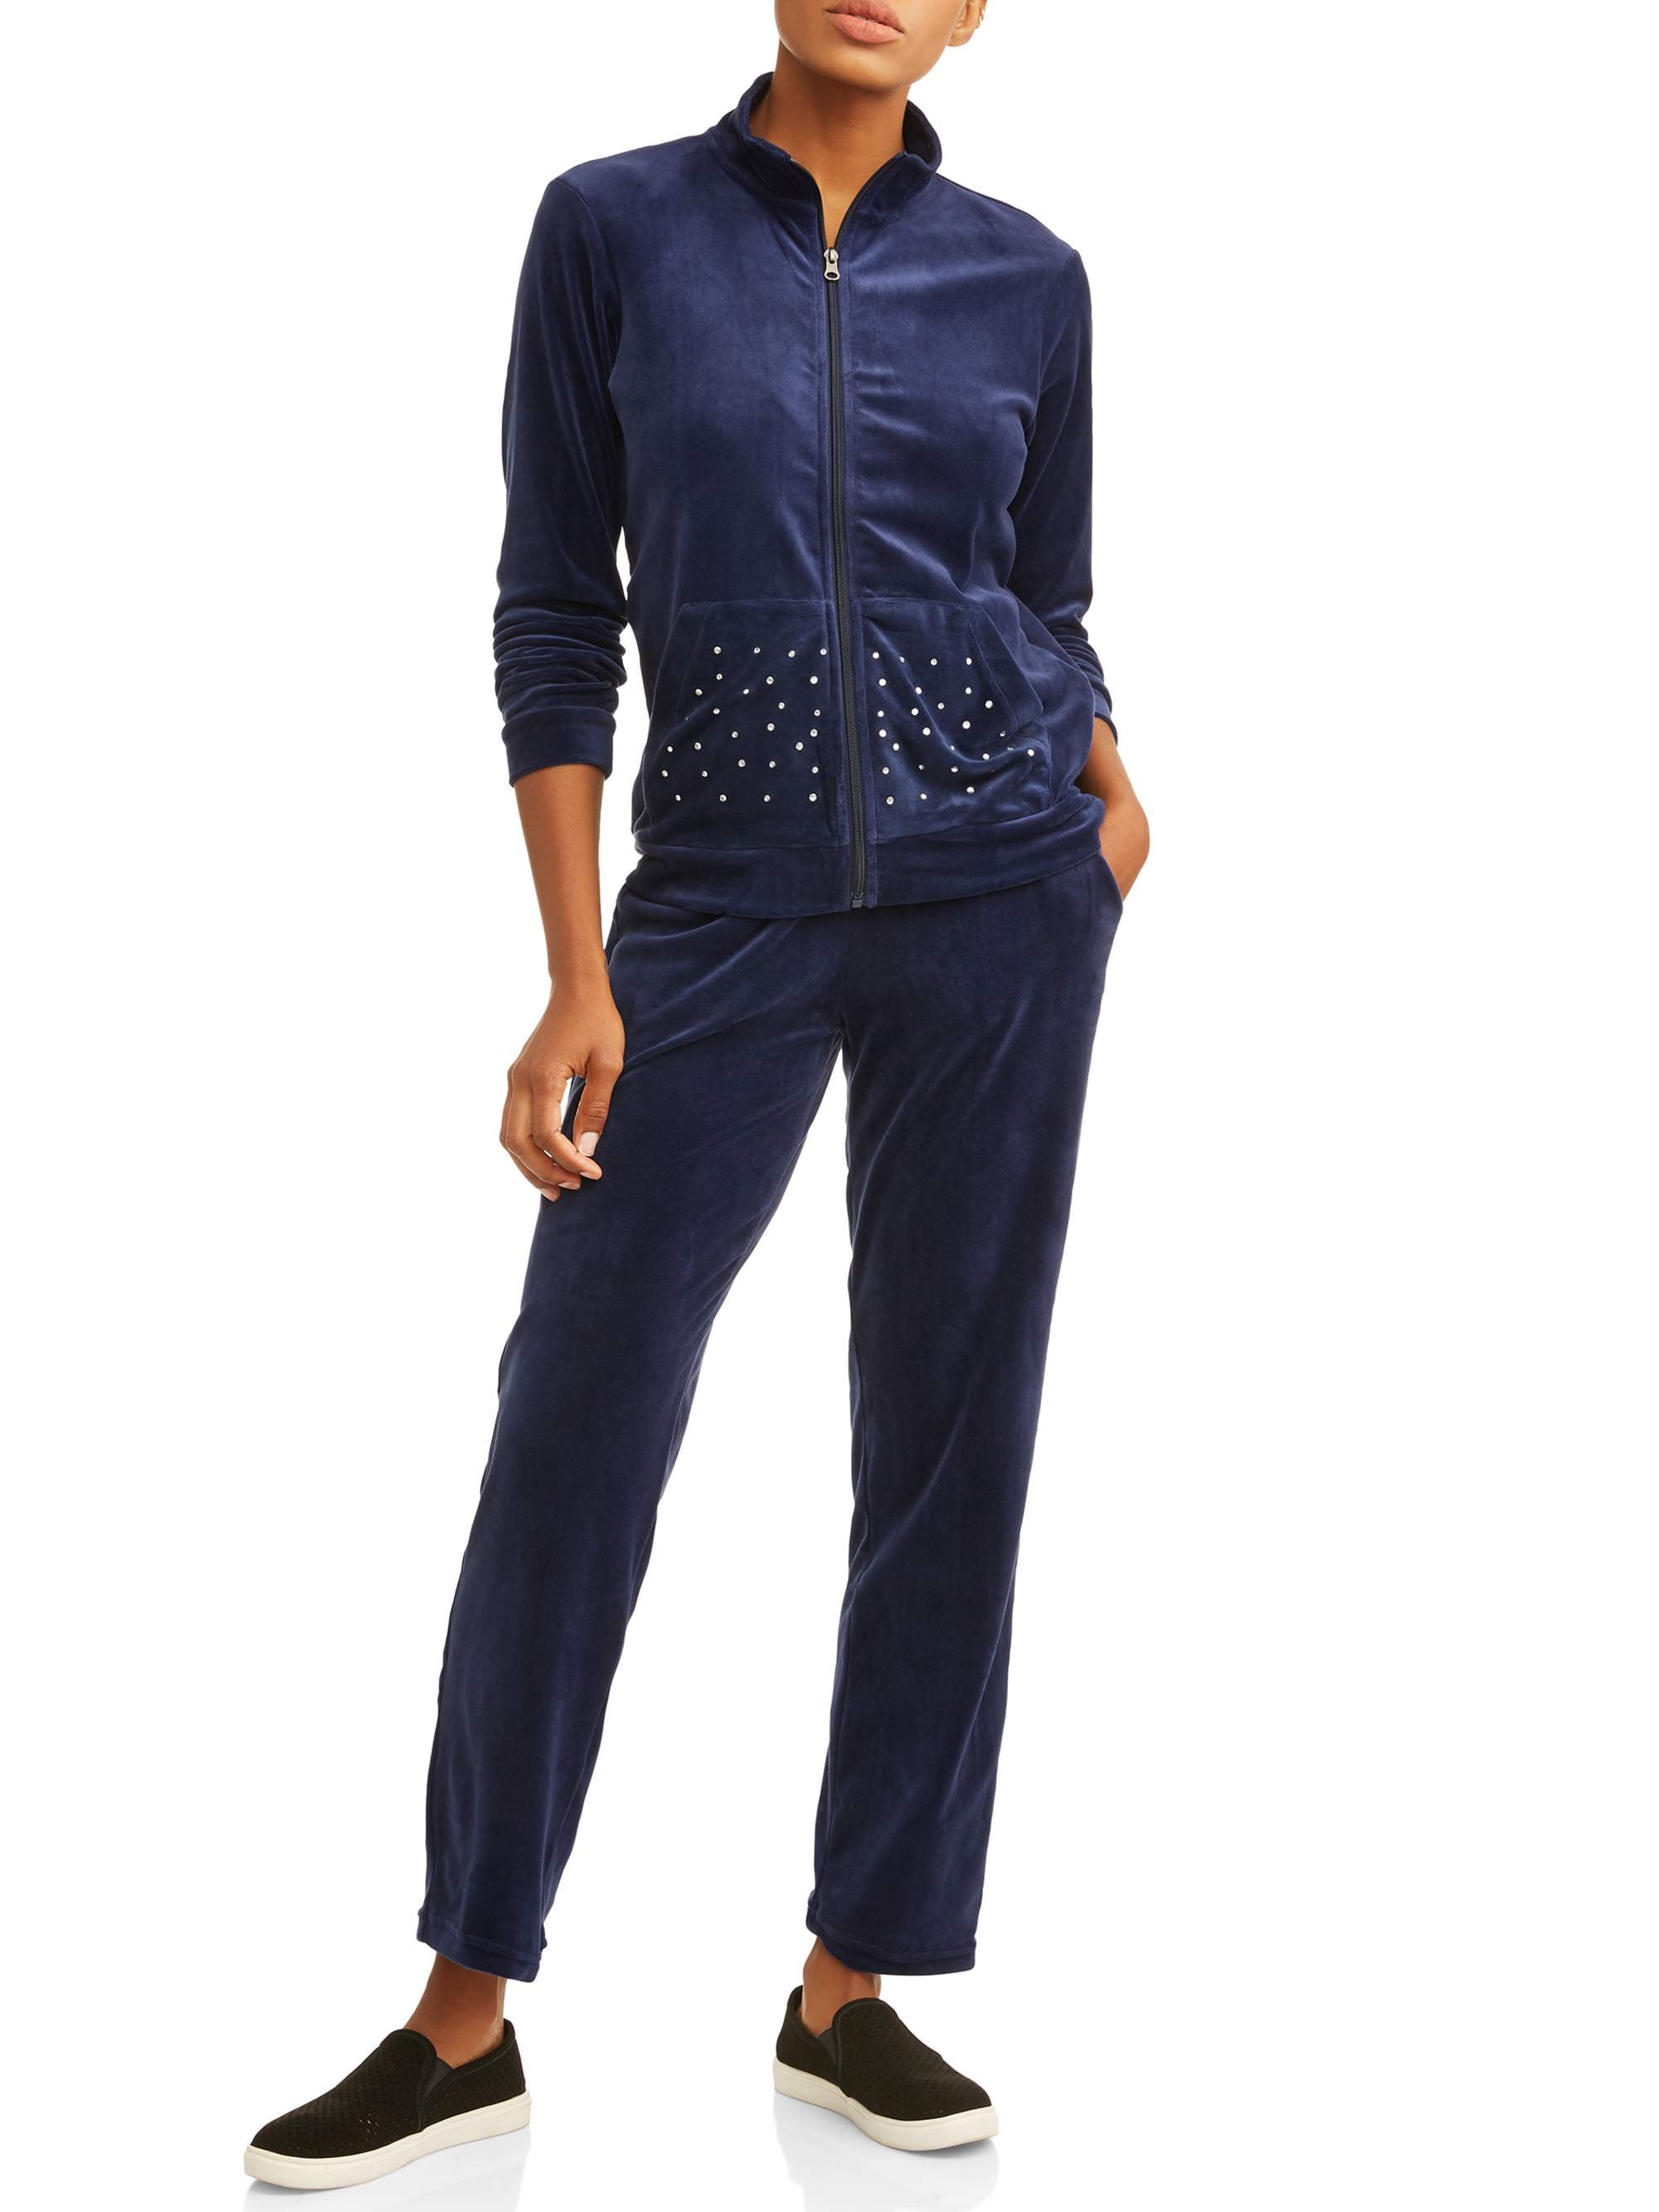 Download Cascade Blue Women's Velour Full Zip Jacket and Pant ...